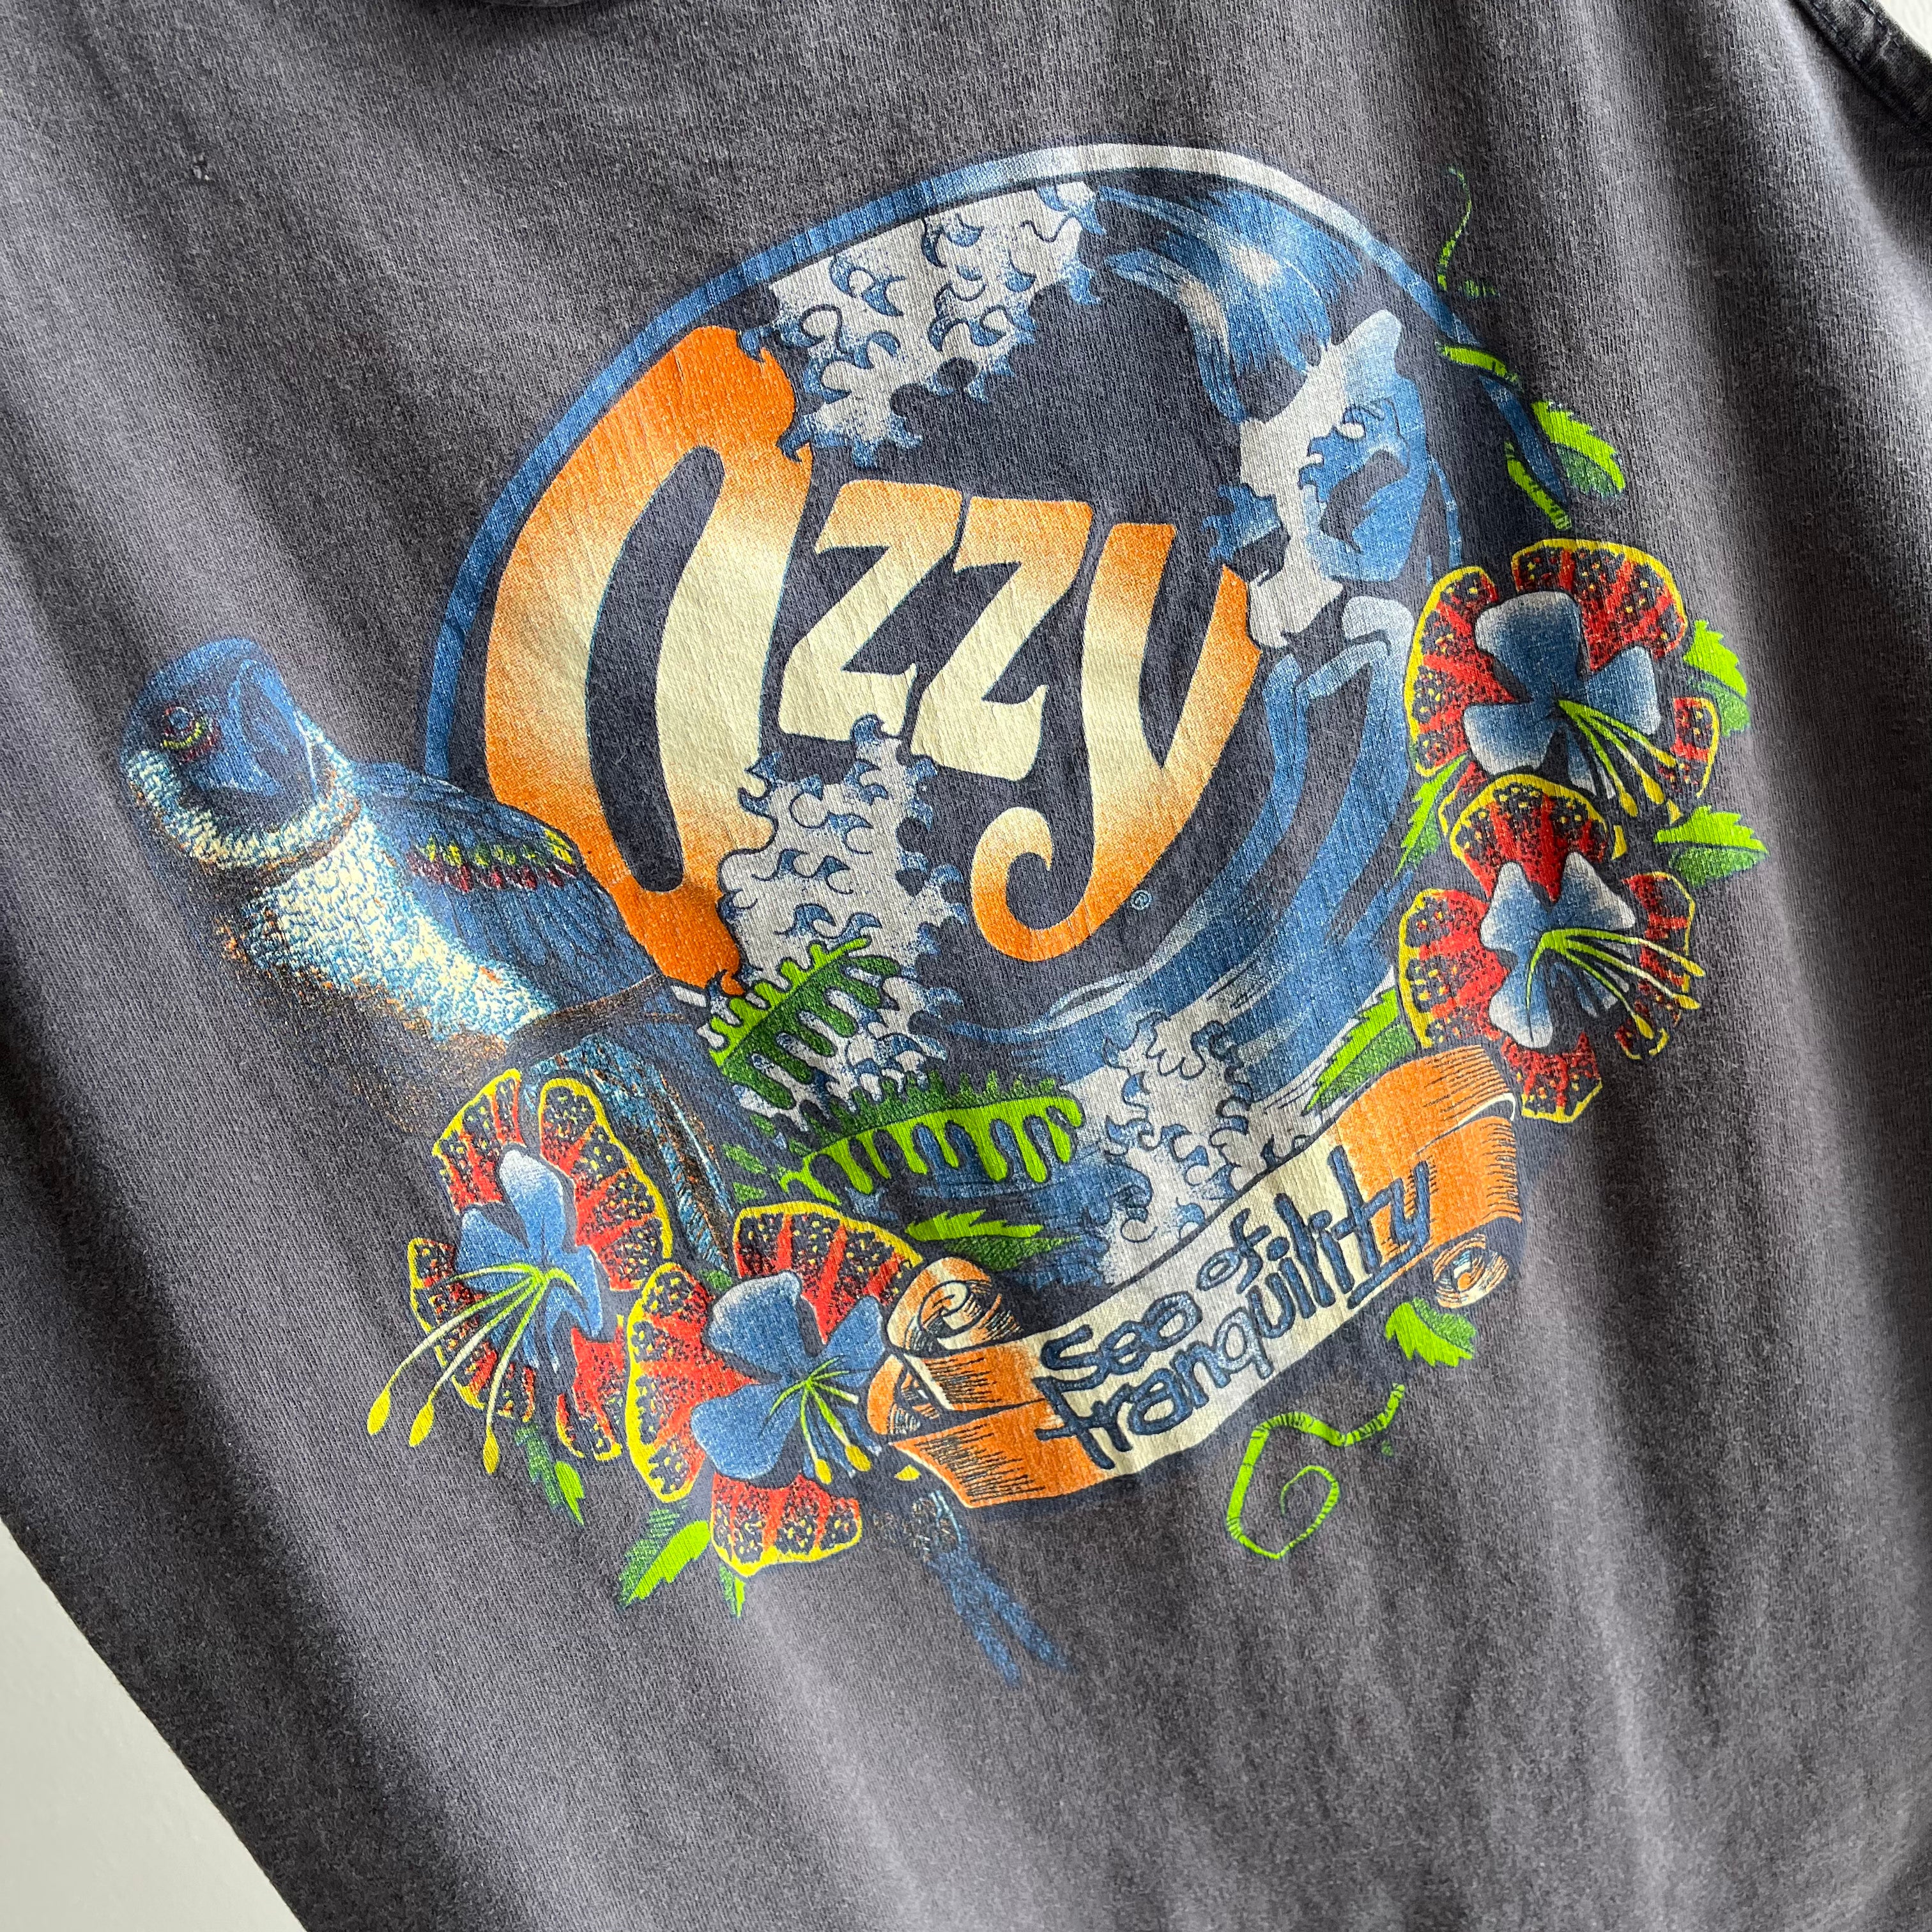 1980/90s Ozzy Surfboards Faded Cotton Surf Tank Top